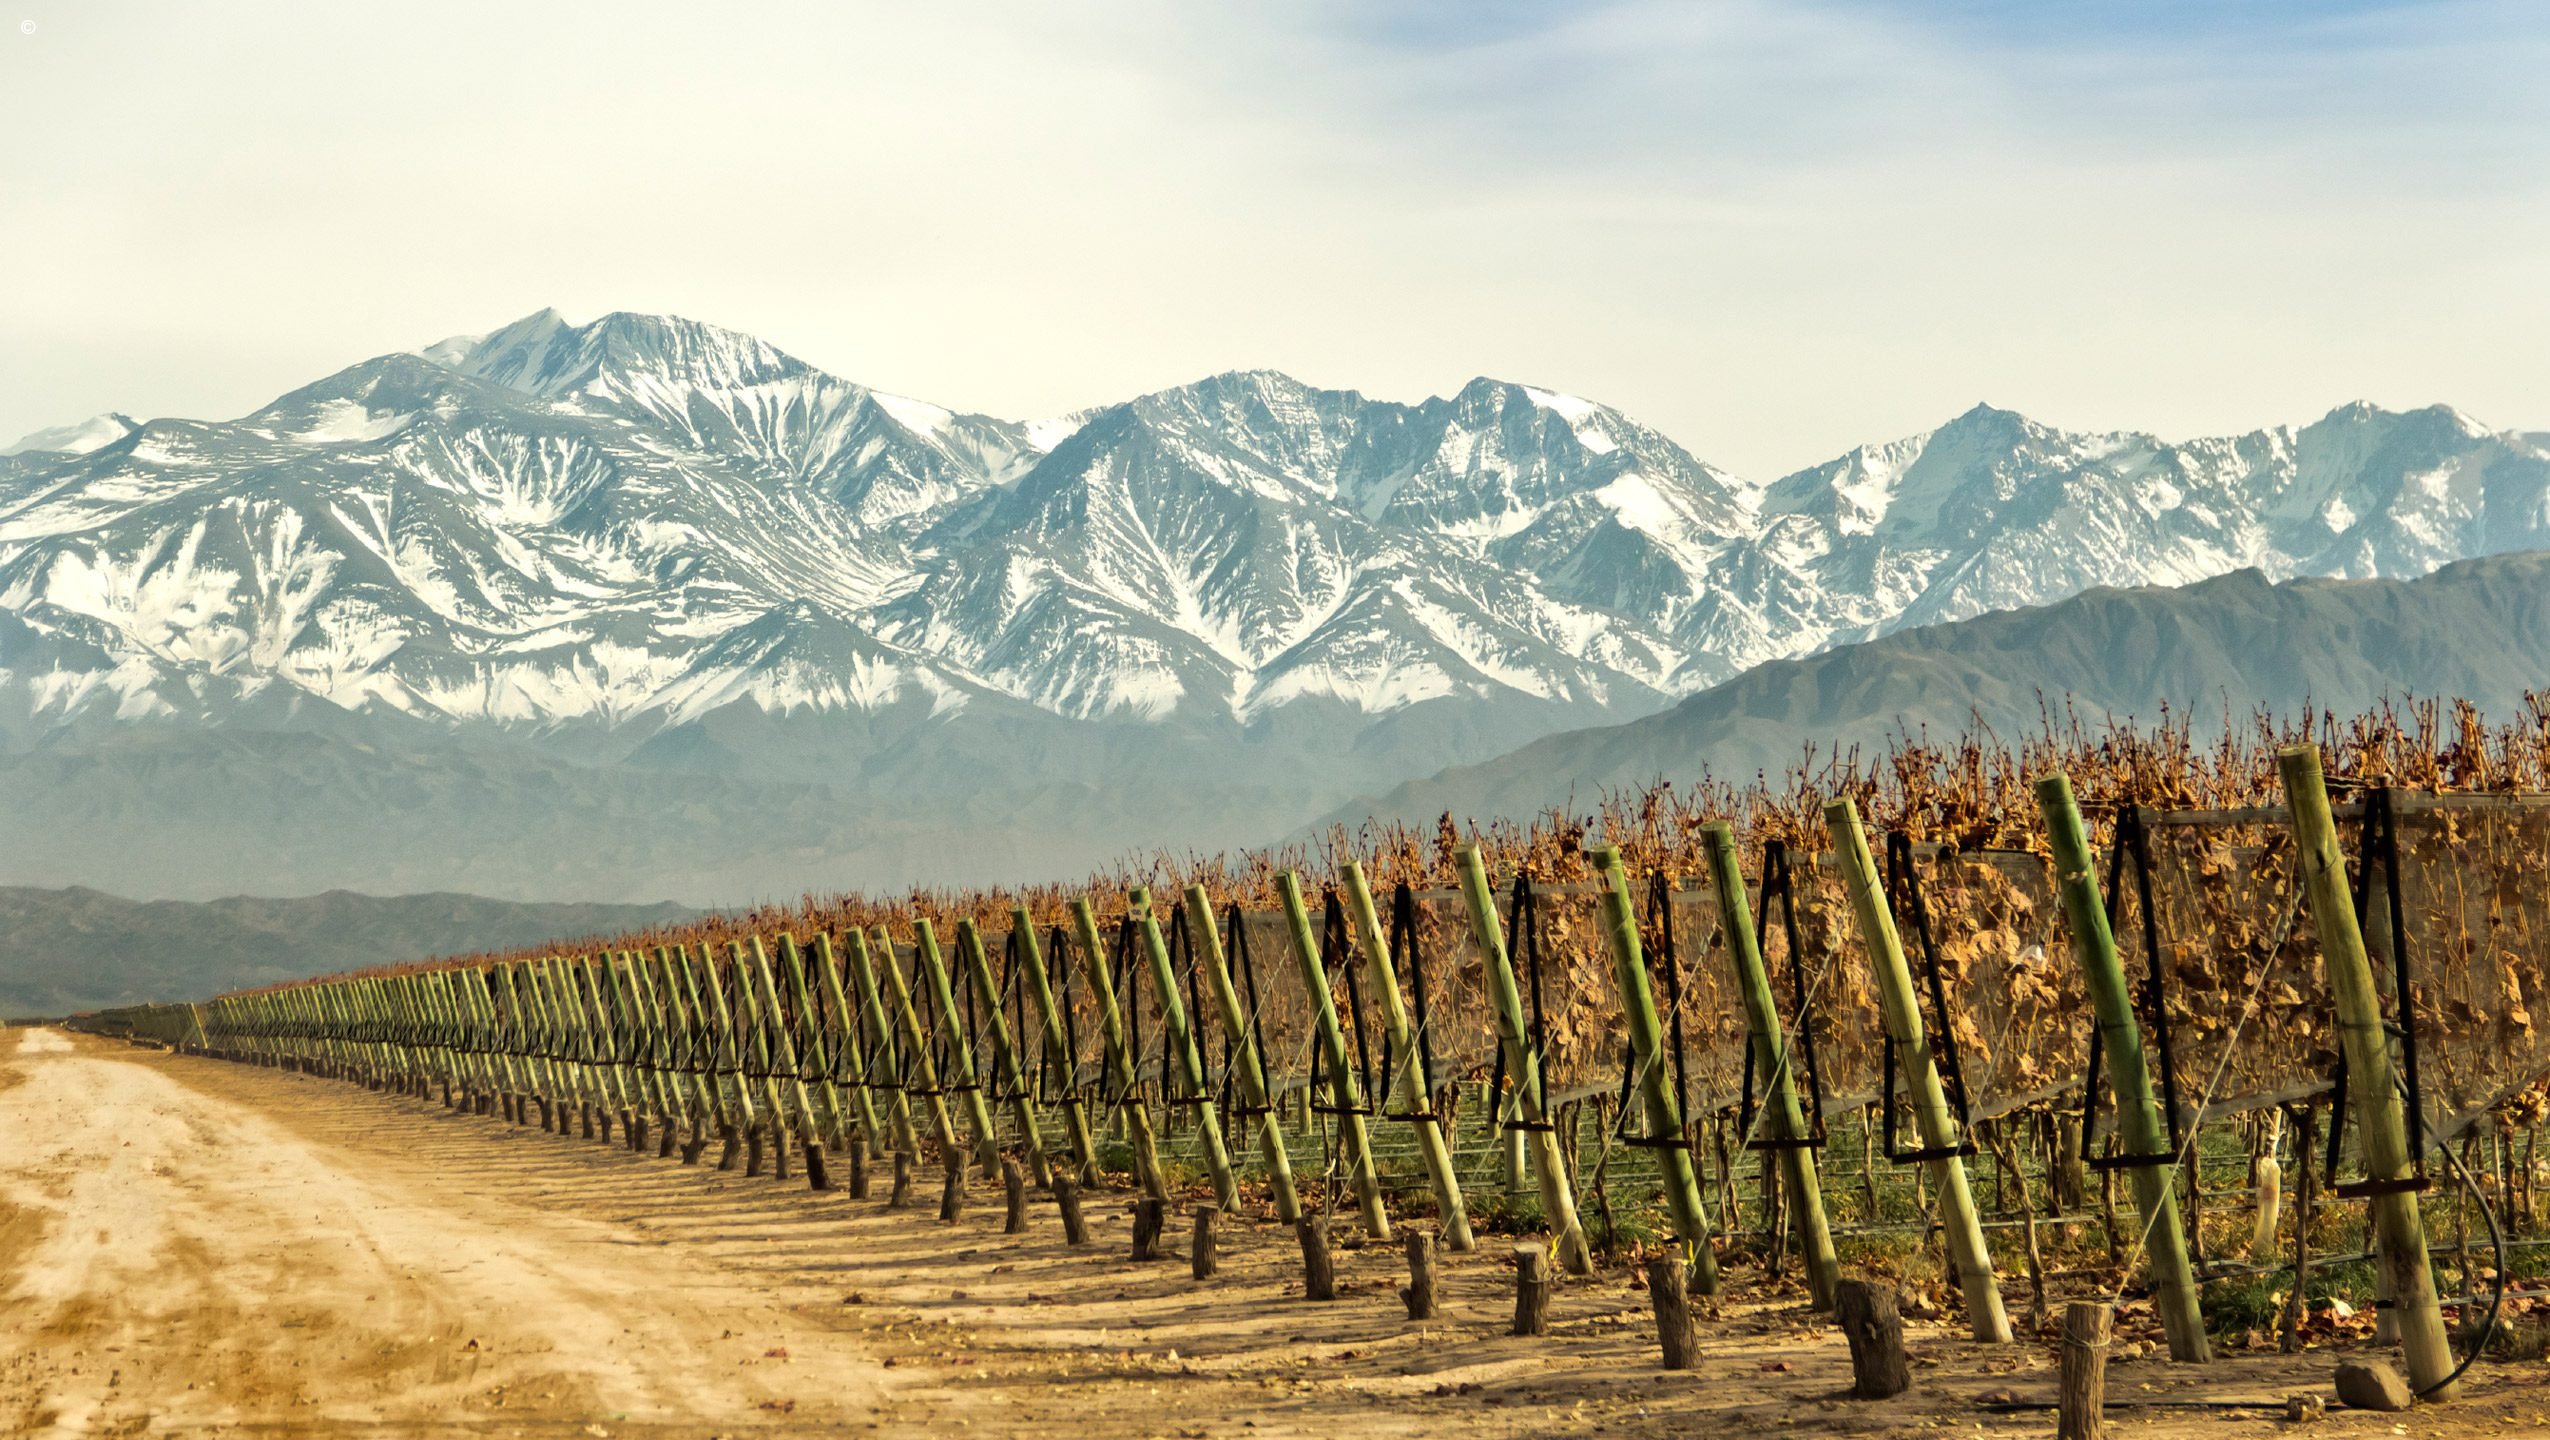 Argentina vs. Chile: Which Has the Best Wine Region?